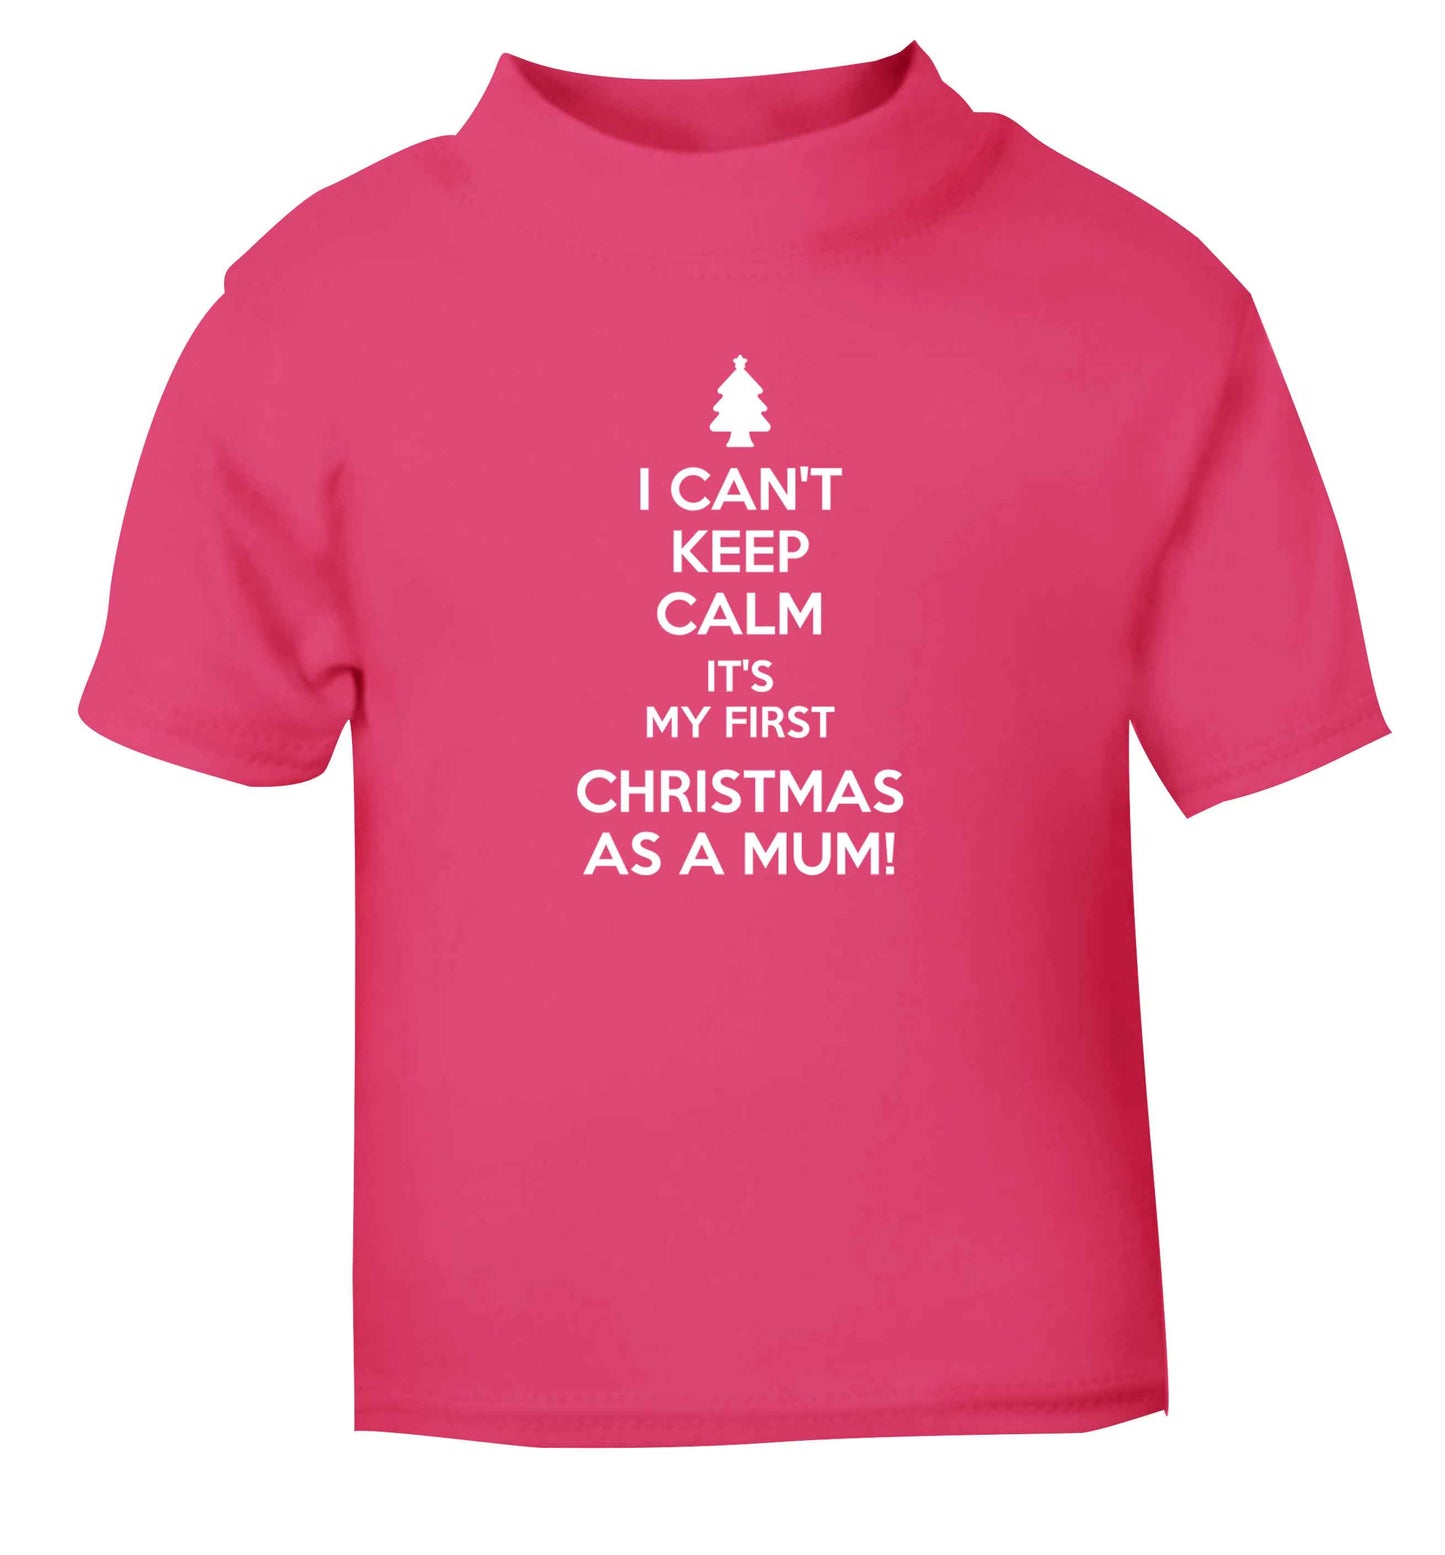 I can't keep calm it's my first Christmas as a mum pink Baby Toddler Tshirt 2 Years